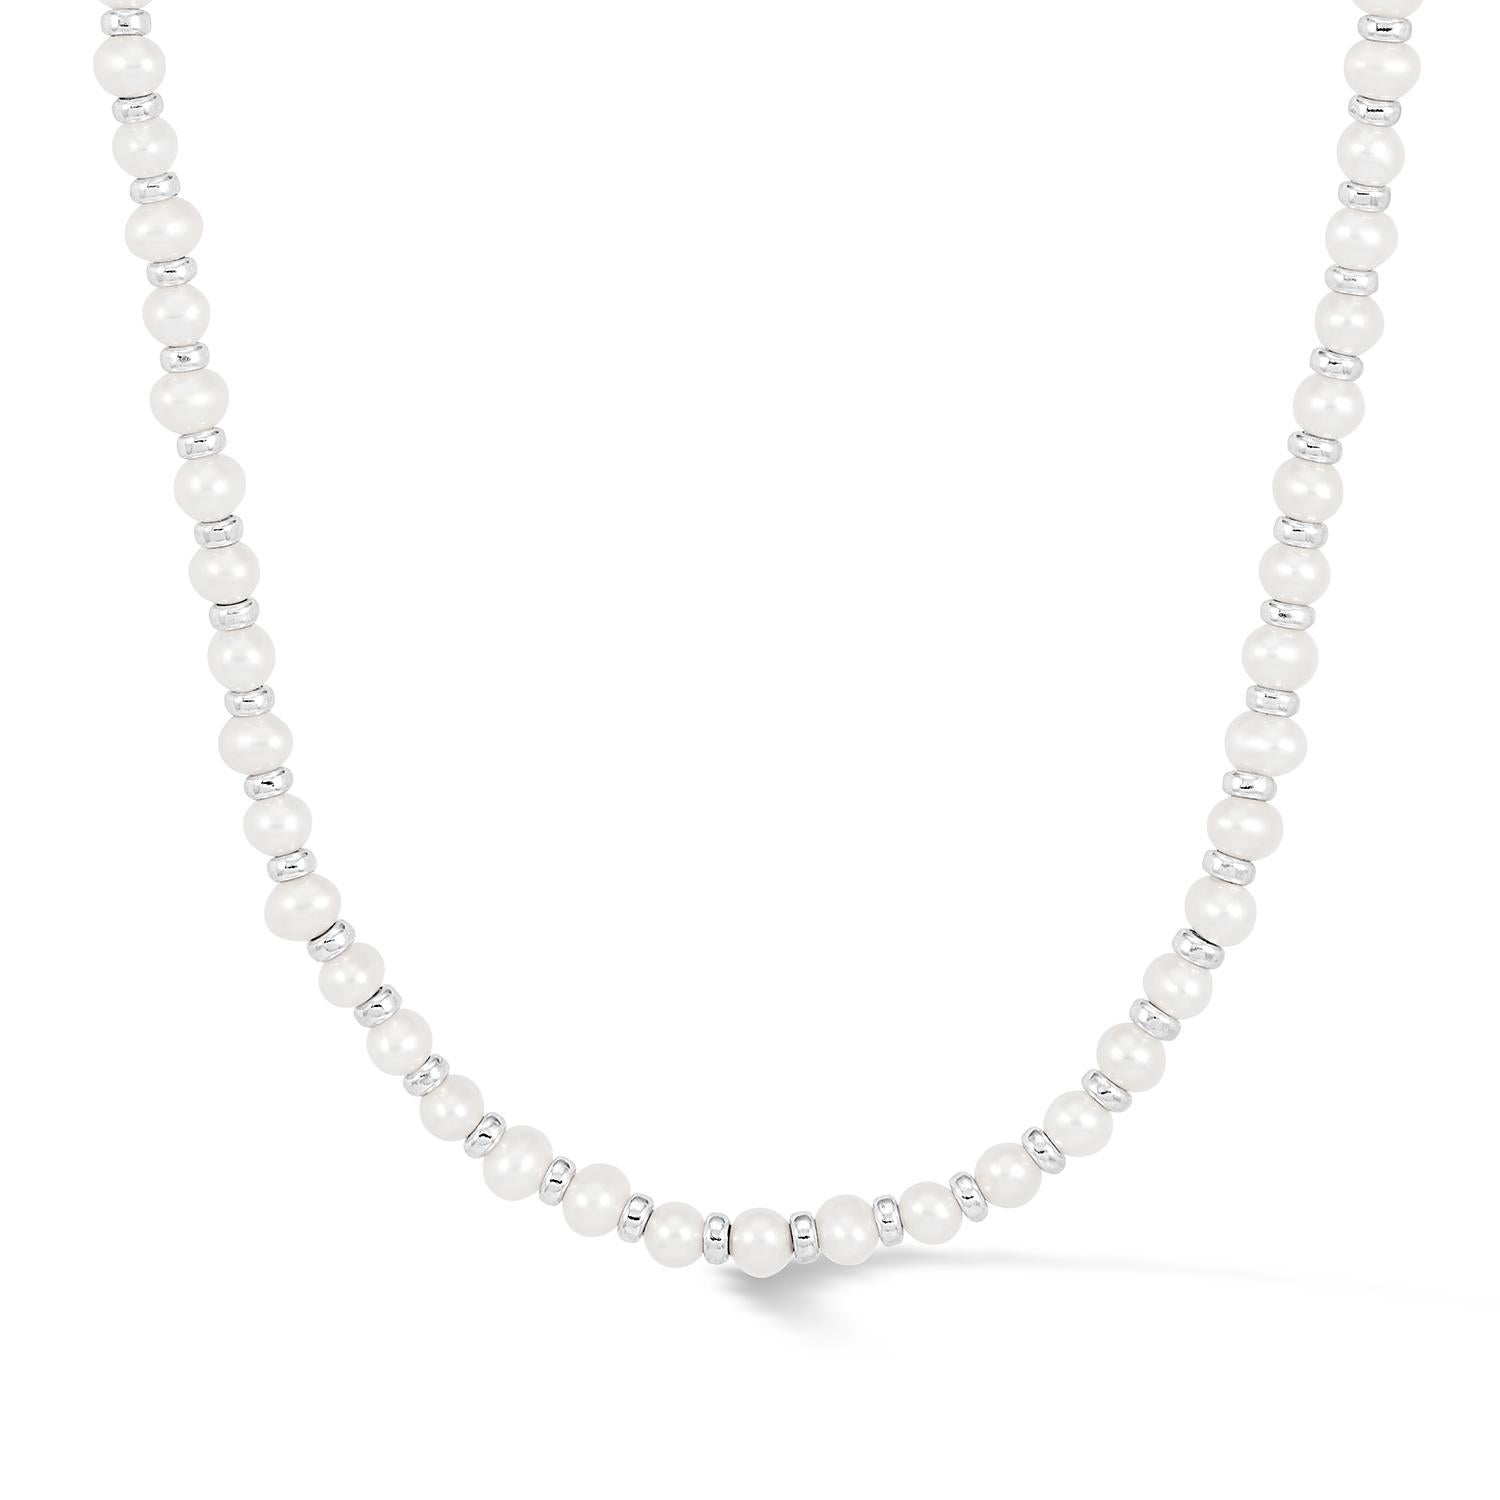 Thread by hand in our London studio, this pearl necklace will slip seamlessly into your collection of style staples. The modern mix of lustrous white freshwater pearls and shiny sterling silver beads makes it perfect for layering with other